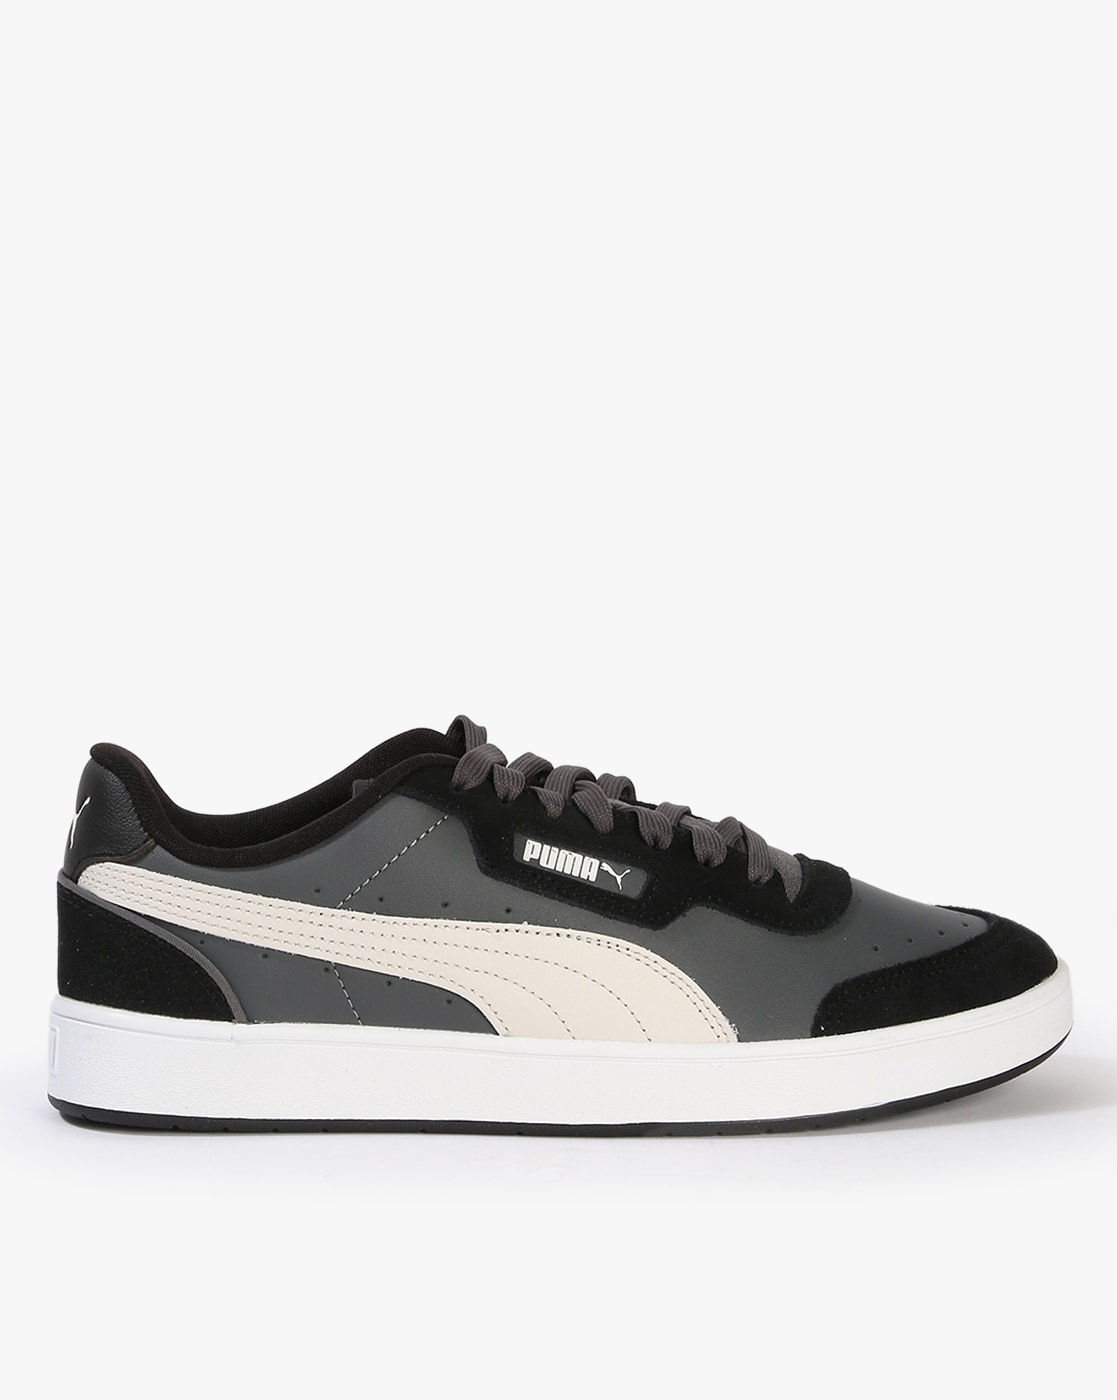 Puma Shoes For Men - Buy Puma Shoes For Men Online in India | Myntra